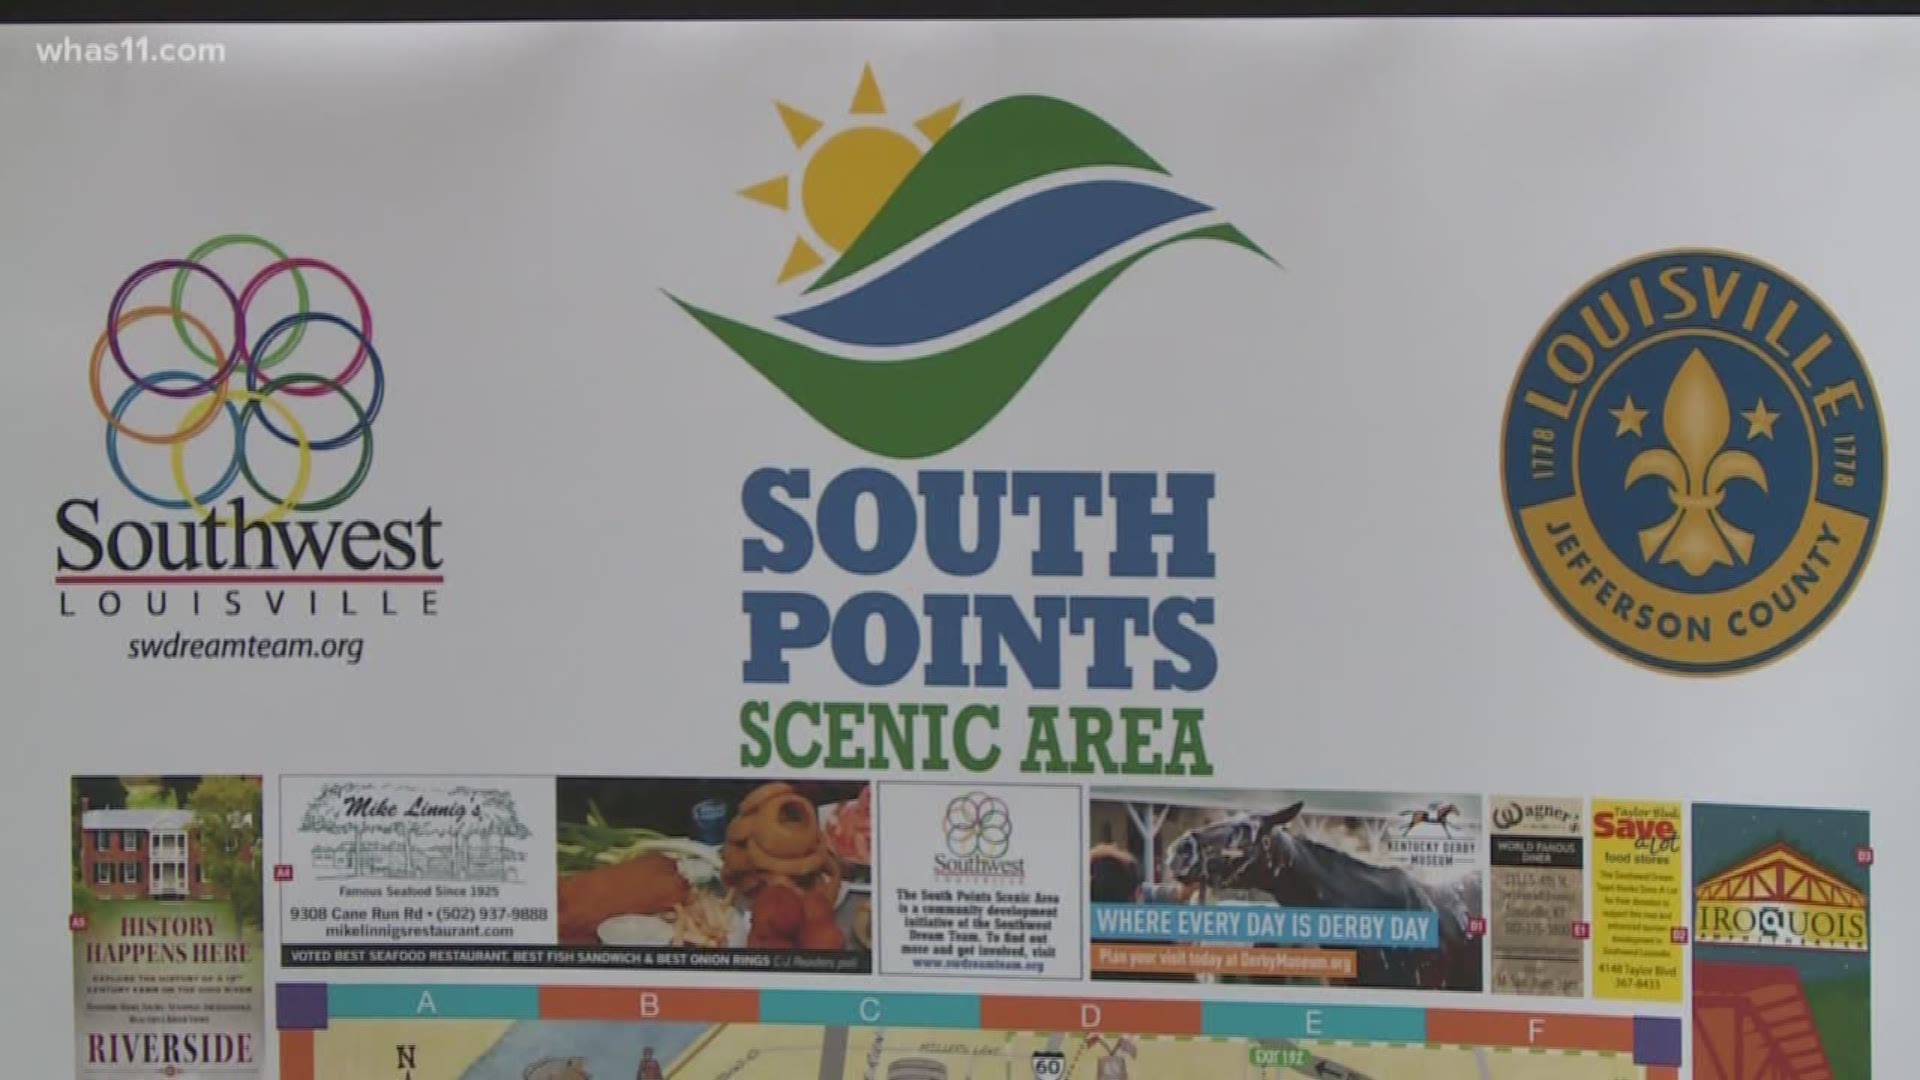 New features of 2018 South Points Scenic Area